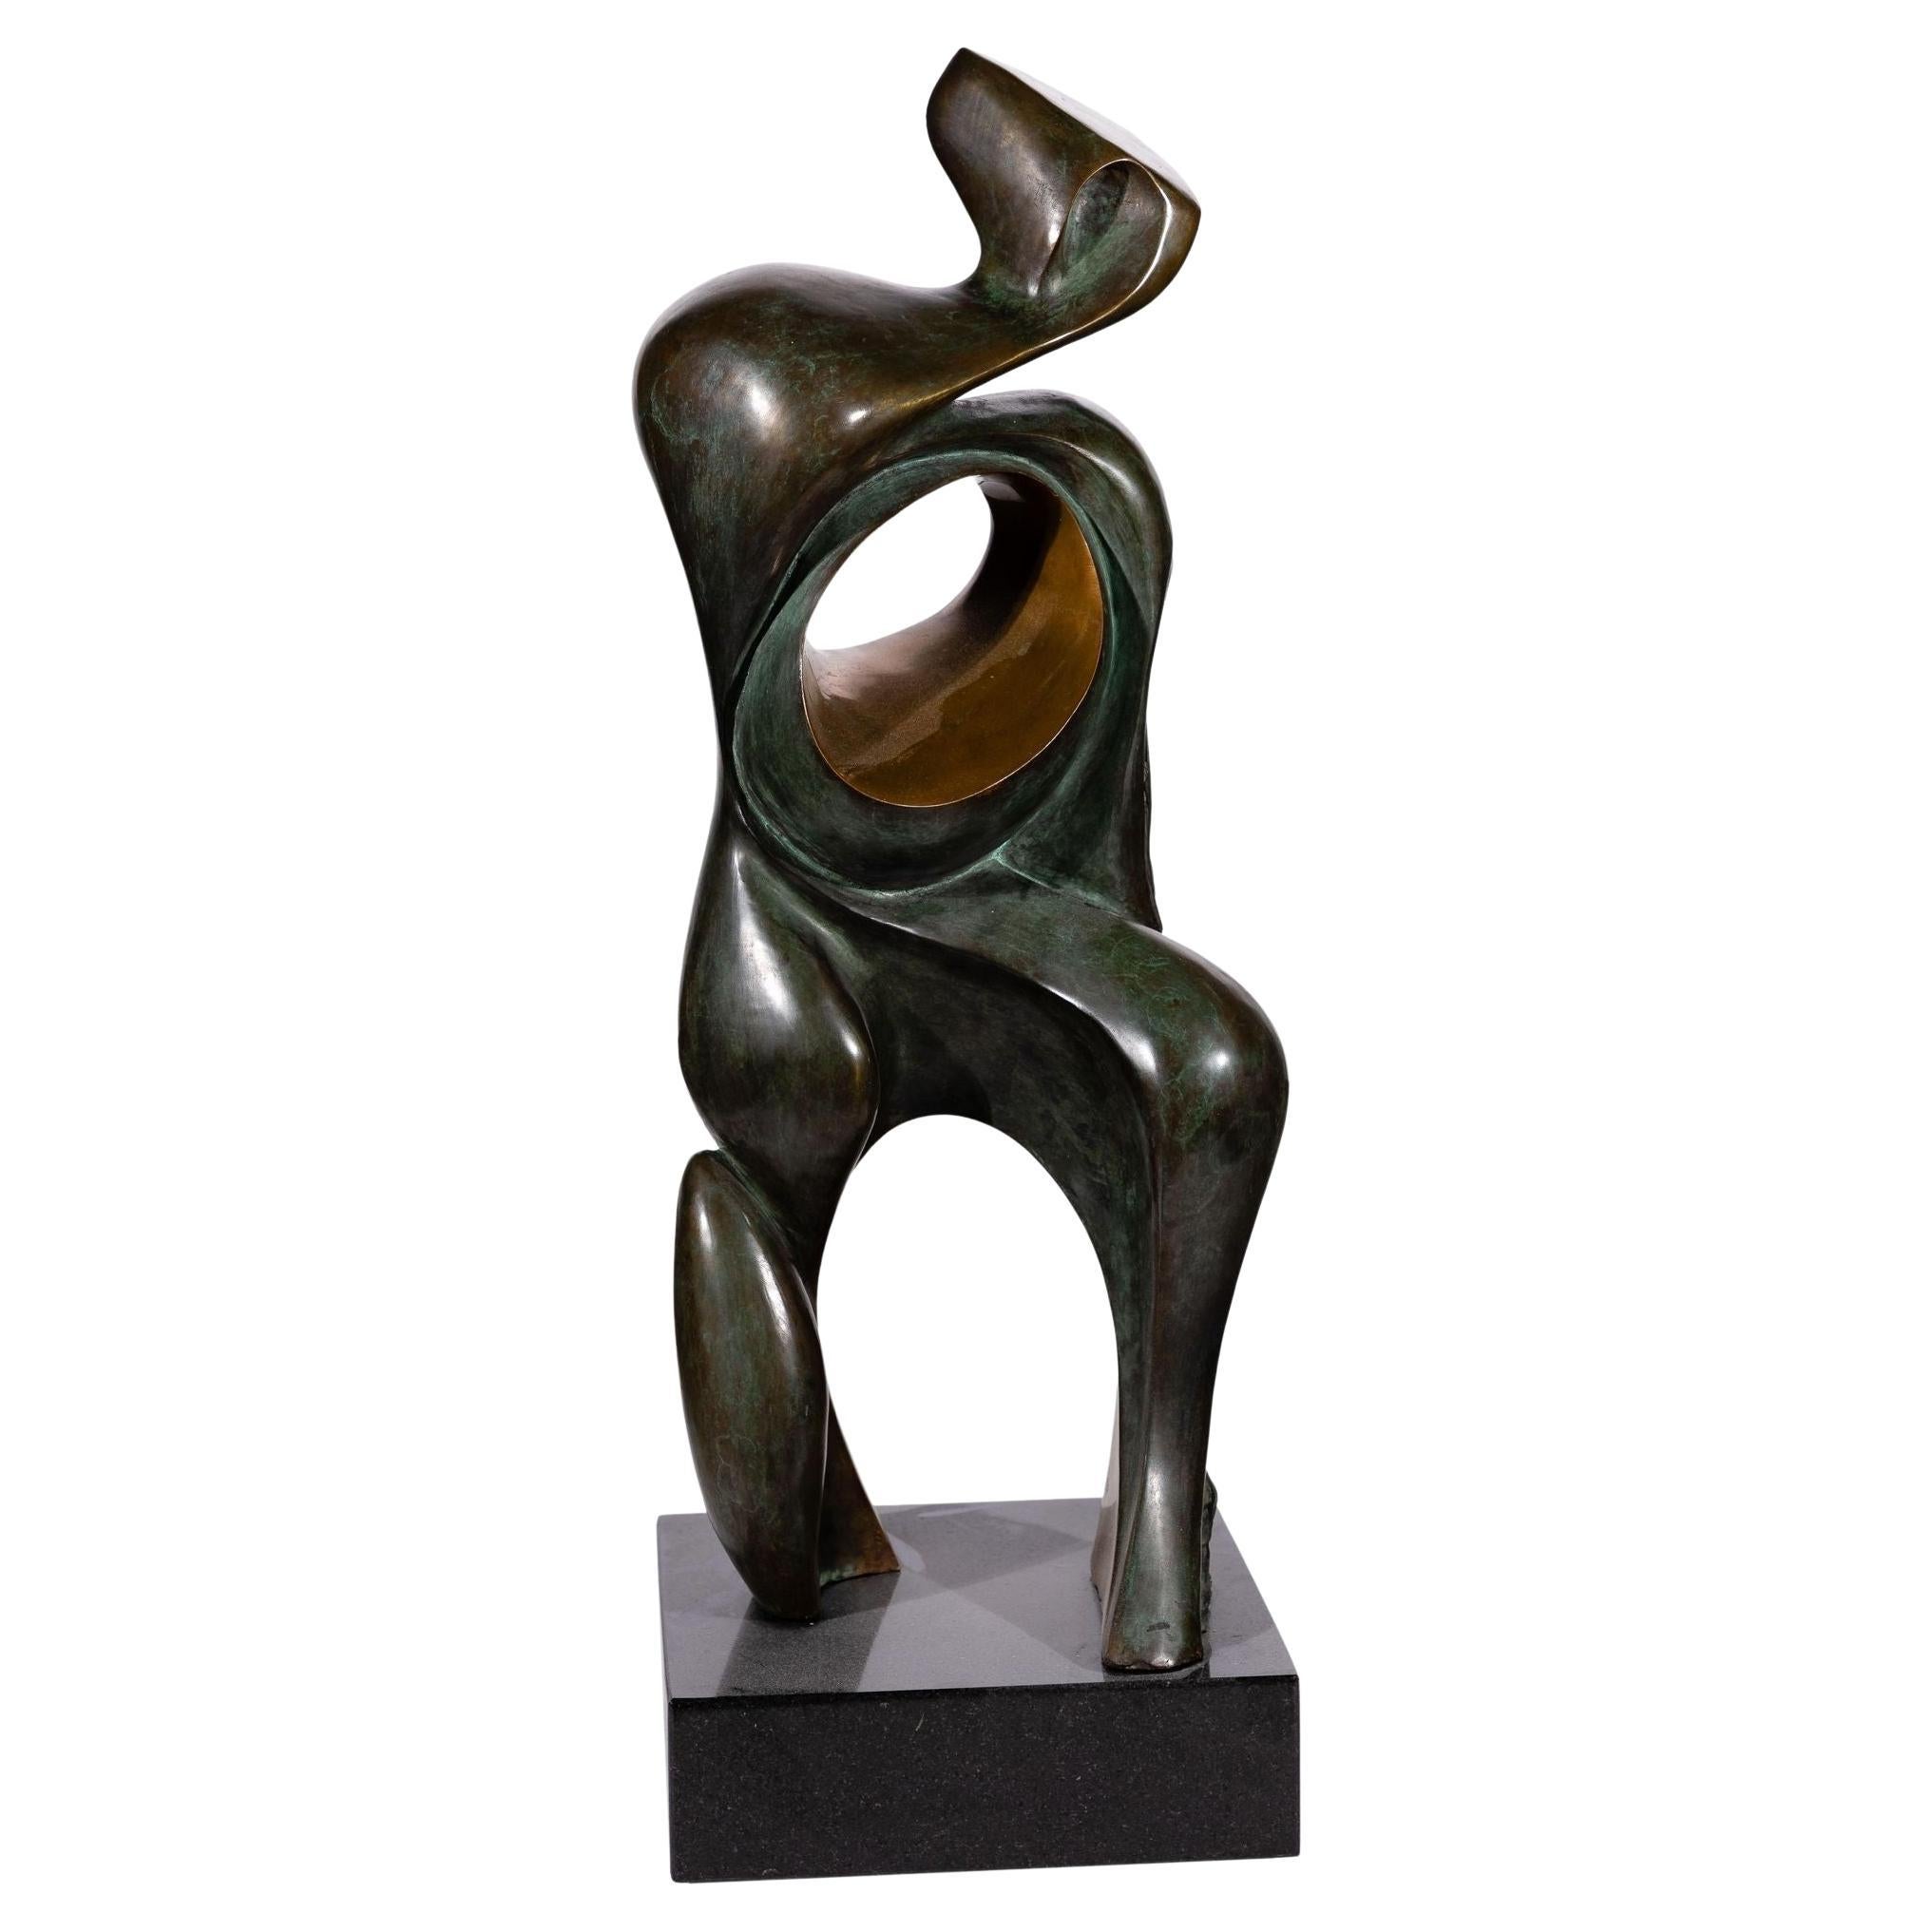 Abstract Bronze Sculpture on Marble Base by Jean Jacques Porret, 1983